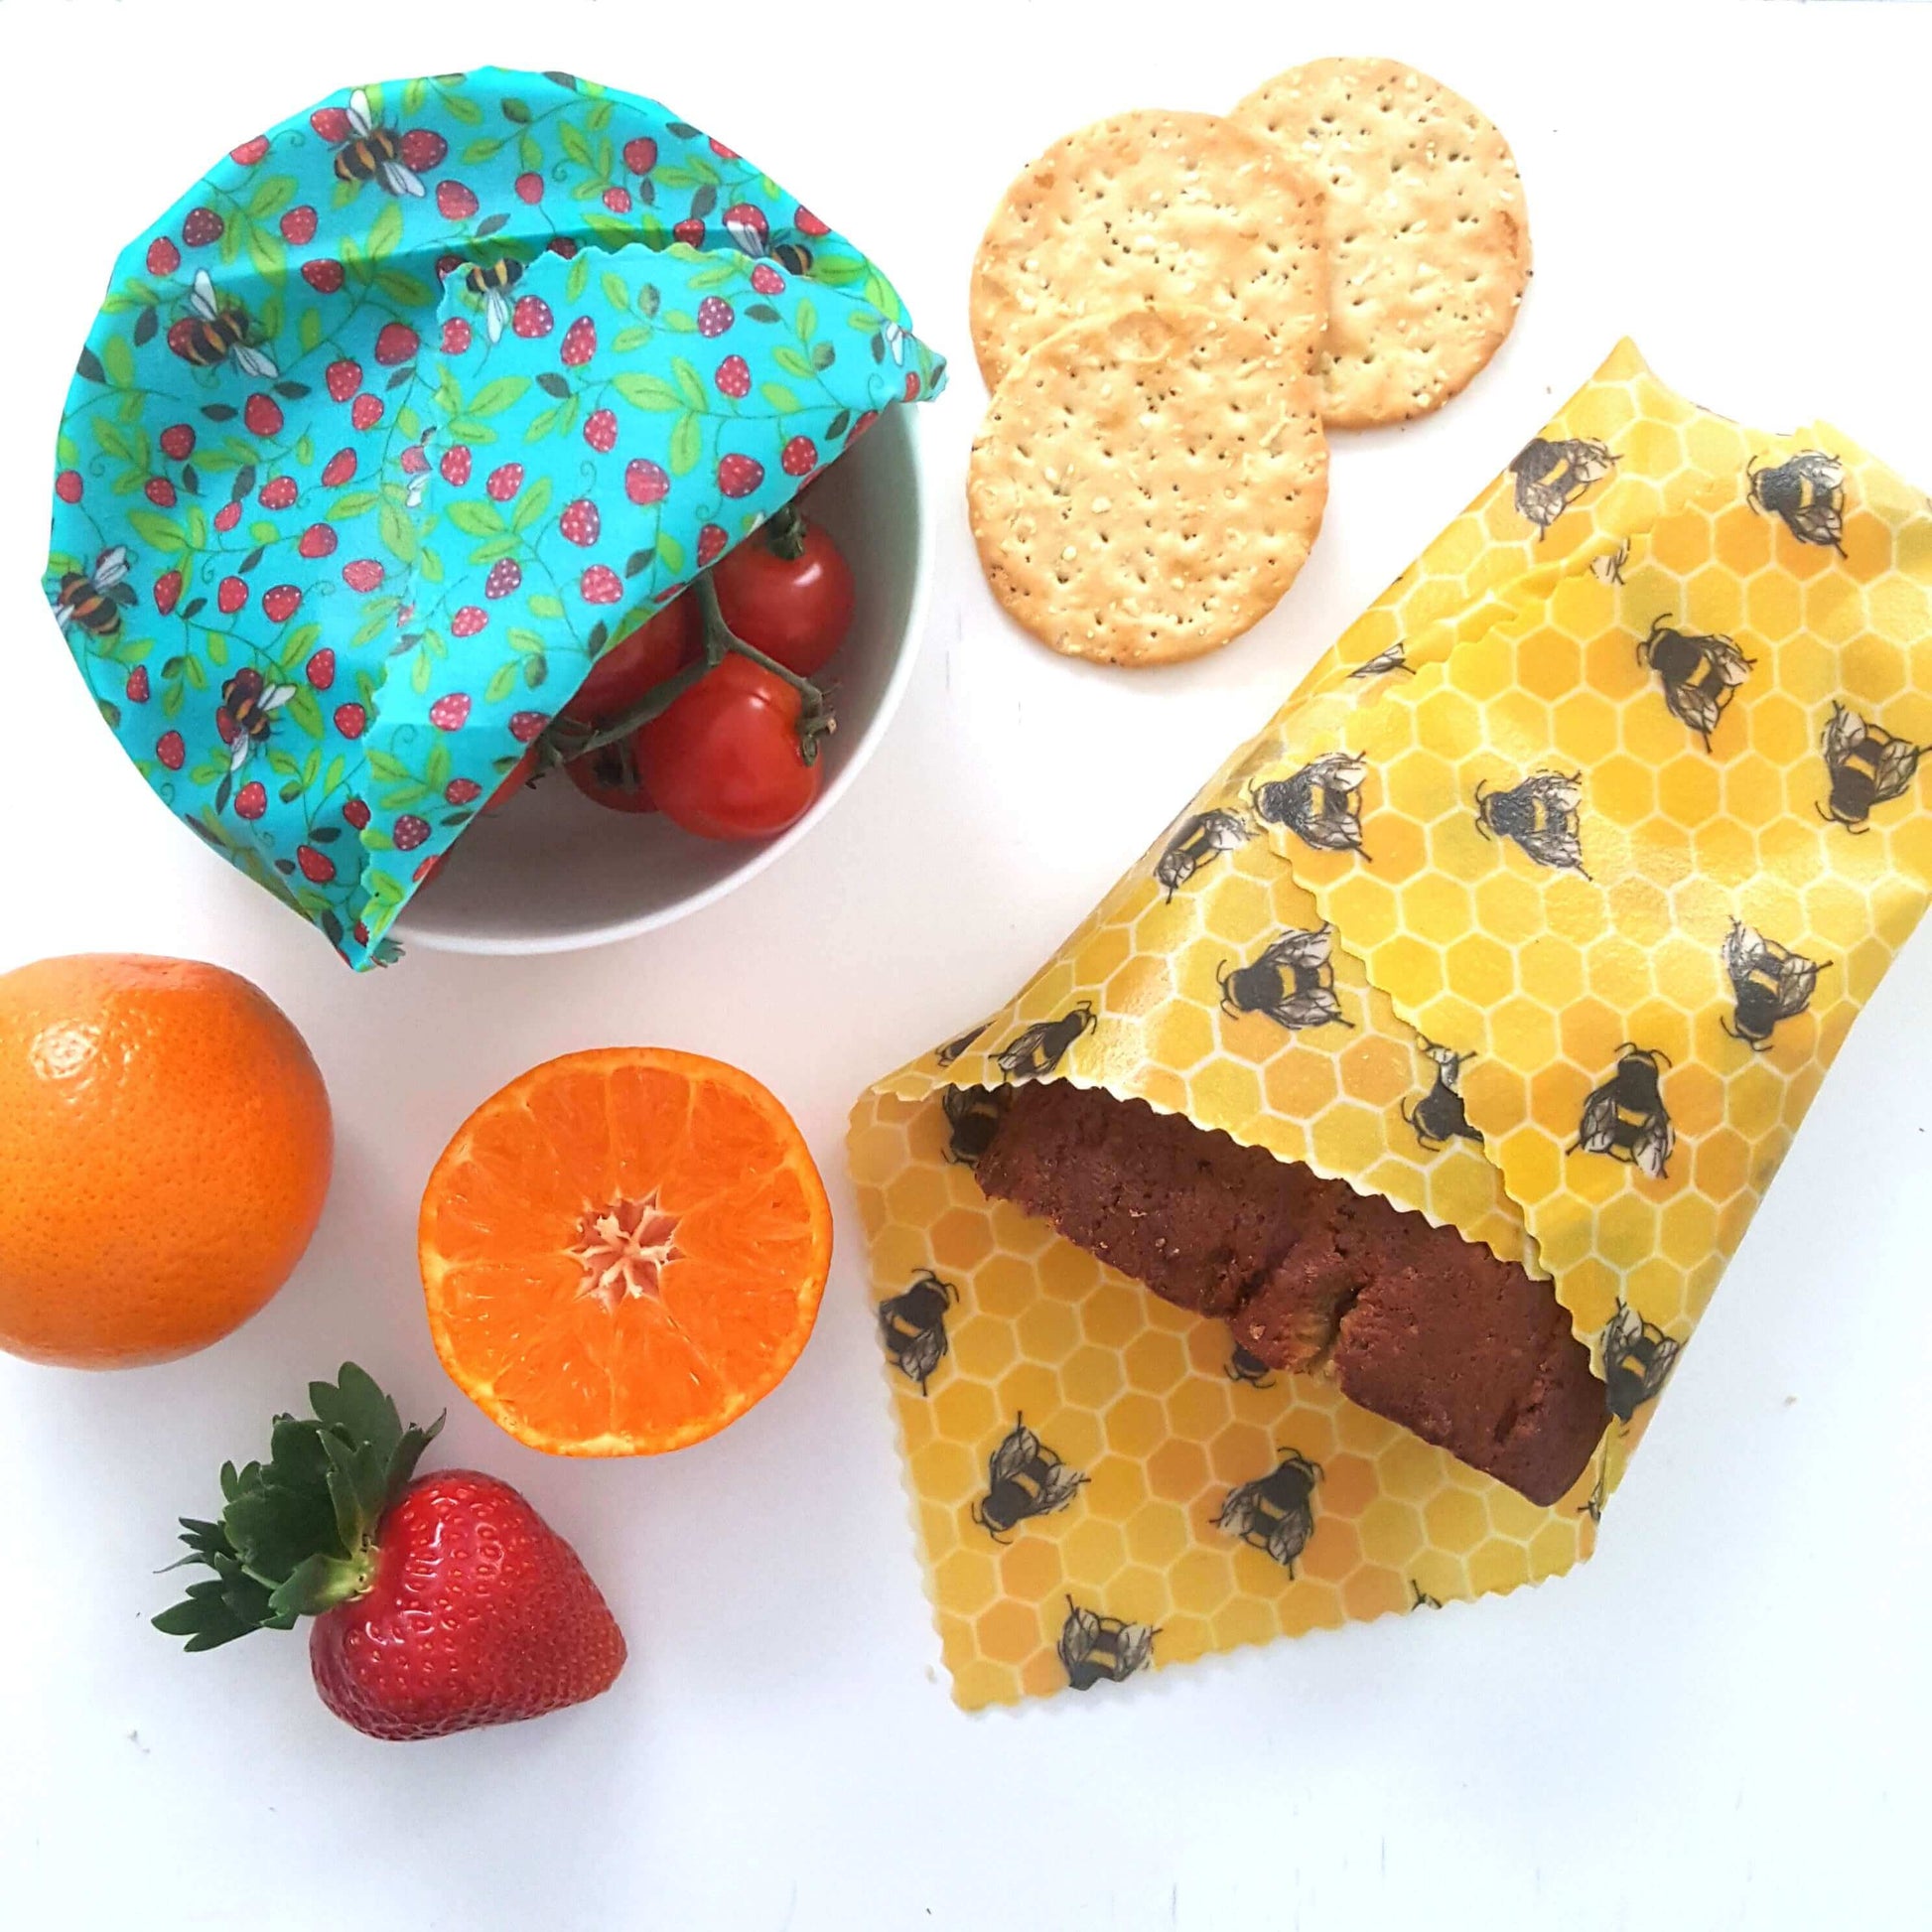 Yellow Bees Earth Kind Sandwich & Bowl Set of 2 Large Beeswax Wraps shown in use